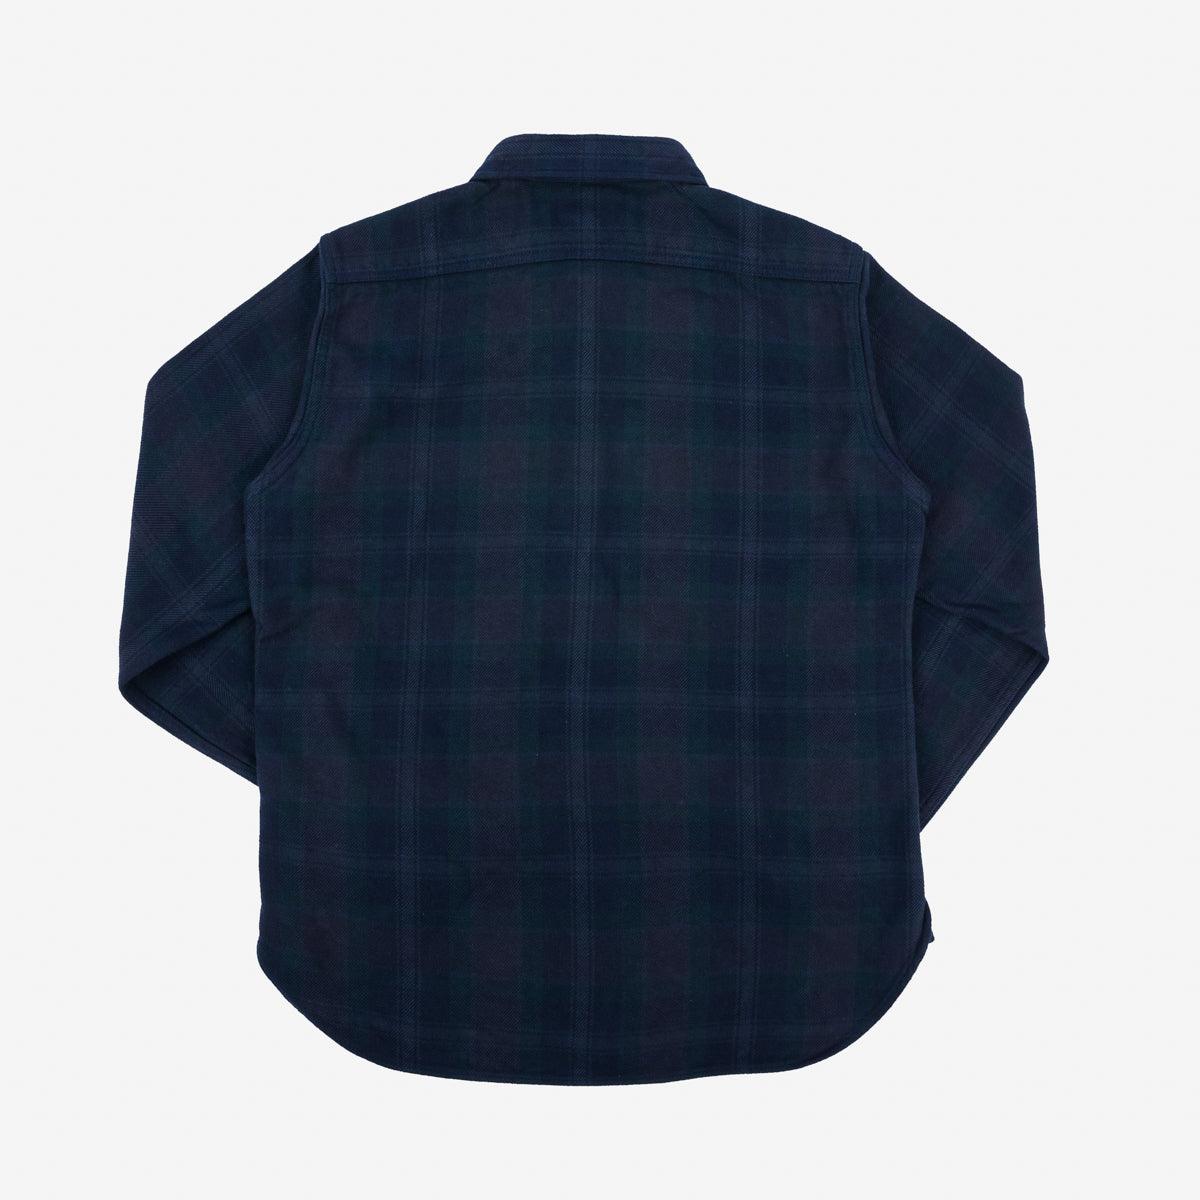 Image showing the IHSH-342-OD - Ultra Heavy Flannel Crazy Check Work Shirt - Navy Overdyed Black which is a Shirts described by the following info Iron Heart, New, Released, Shirts, Tops and sold on the IRON HEART GERMANY online store